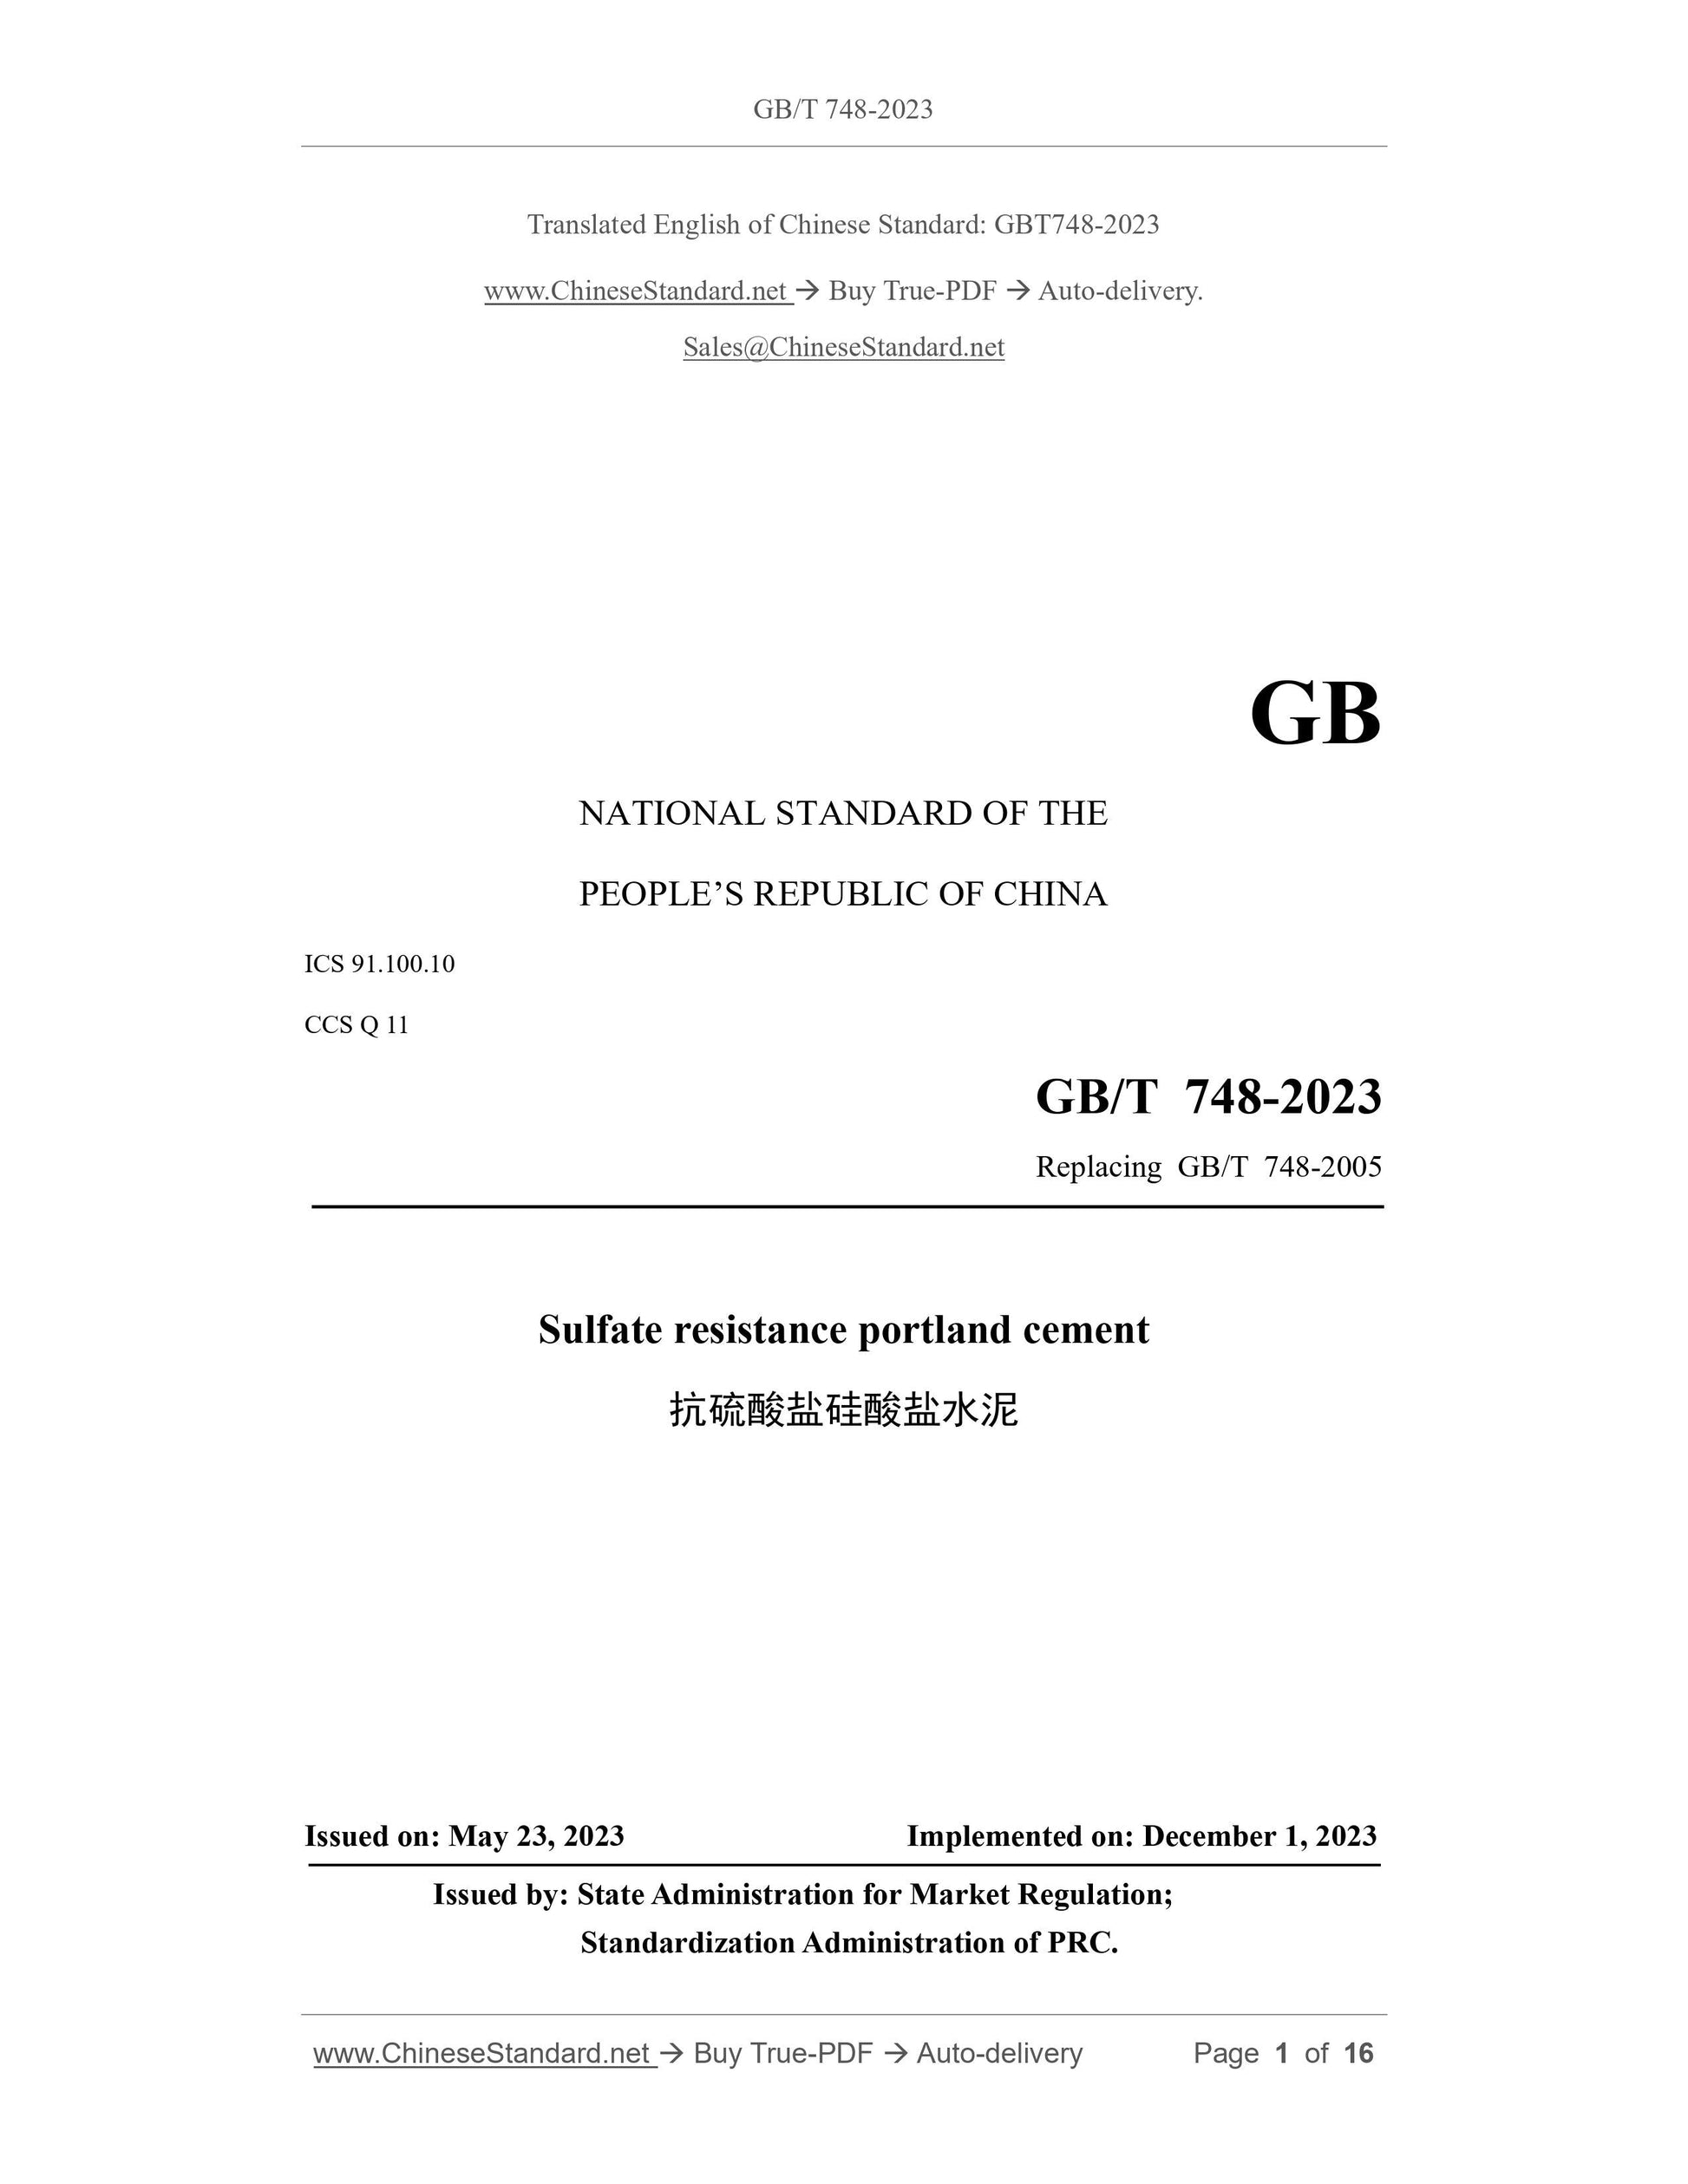 GB/T 748-2023 Page 1